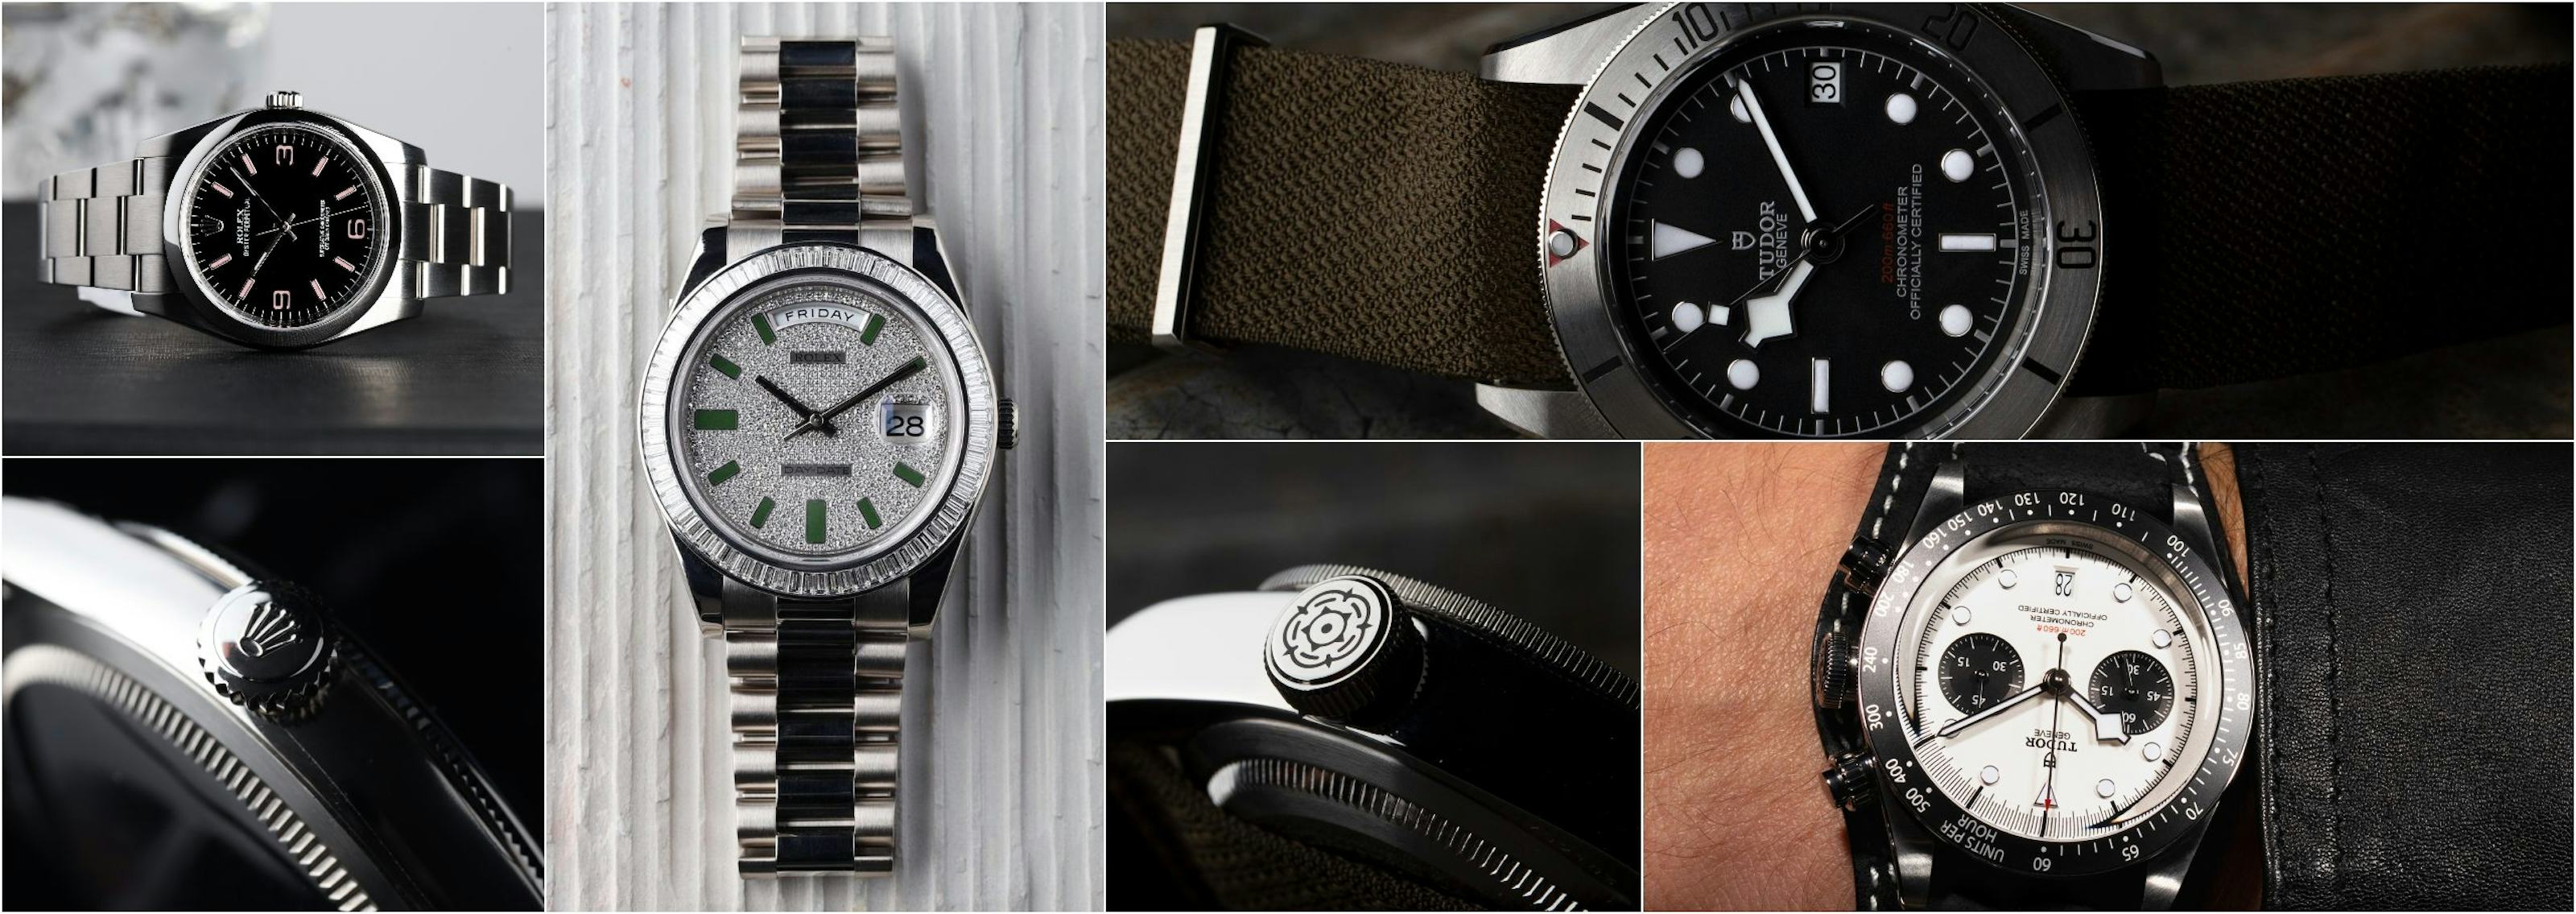 Tudor vs Rolex Watches: A Difference? |